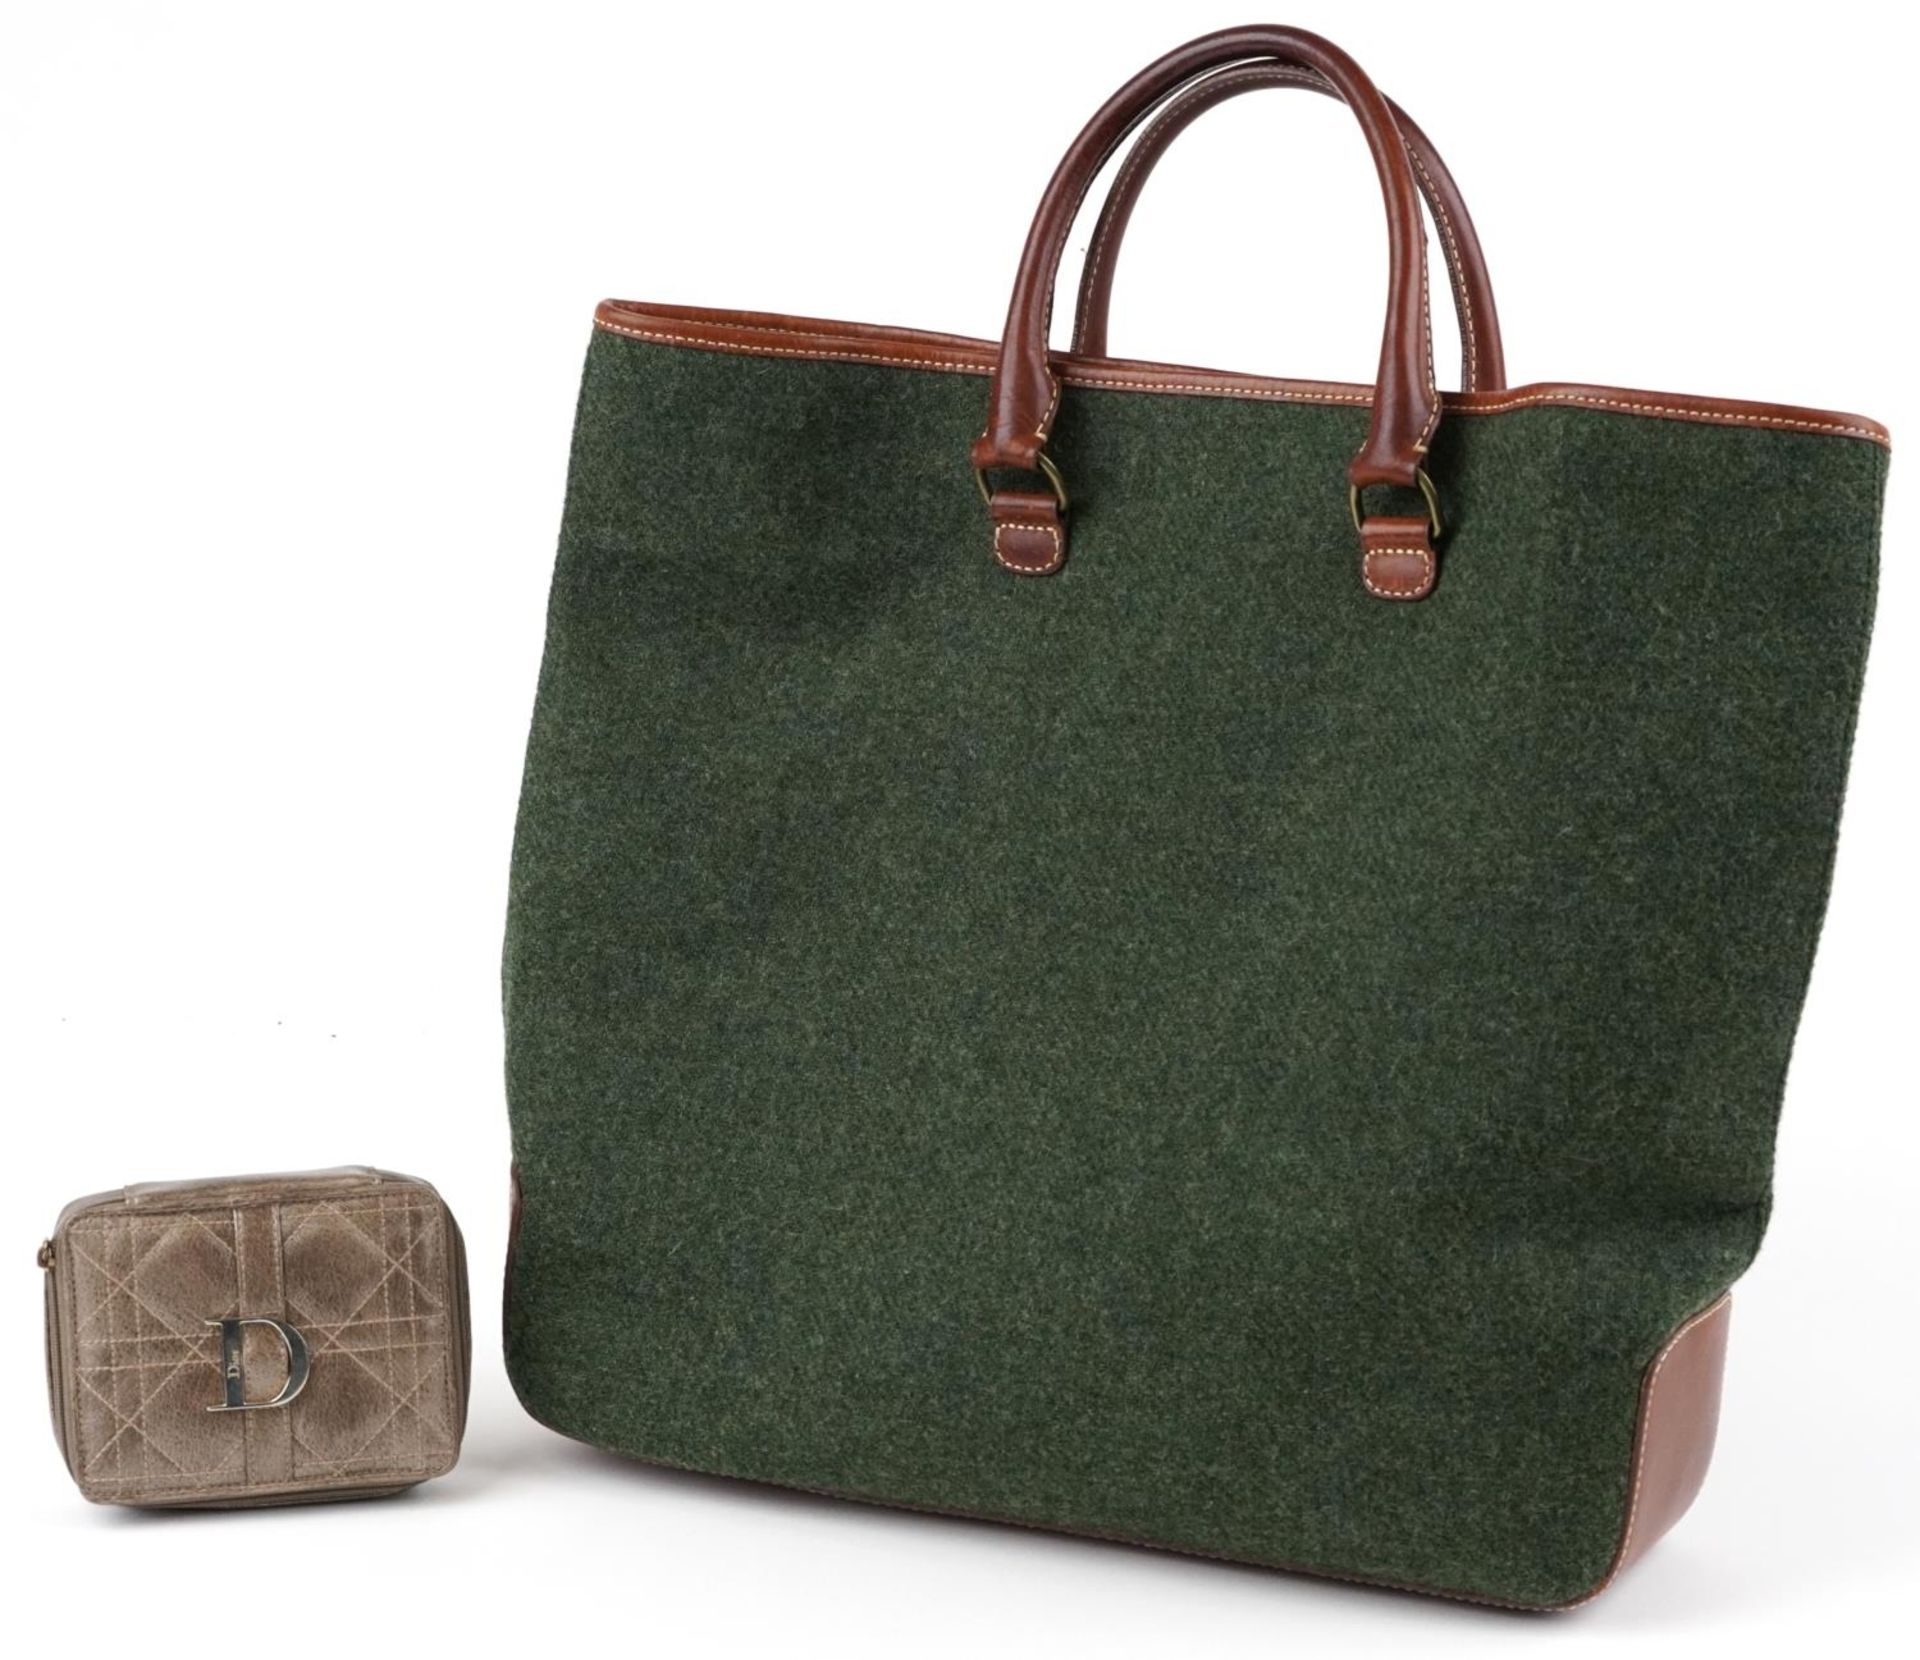 J Crew woollen and leather bag together with a Christian Dior makeup bag, largest 46cm x 36cm :